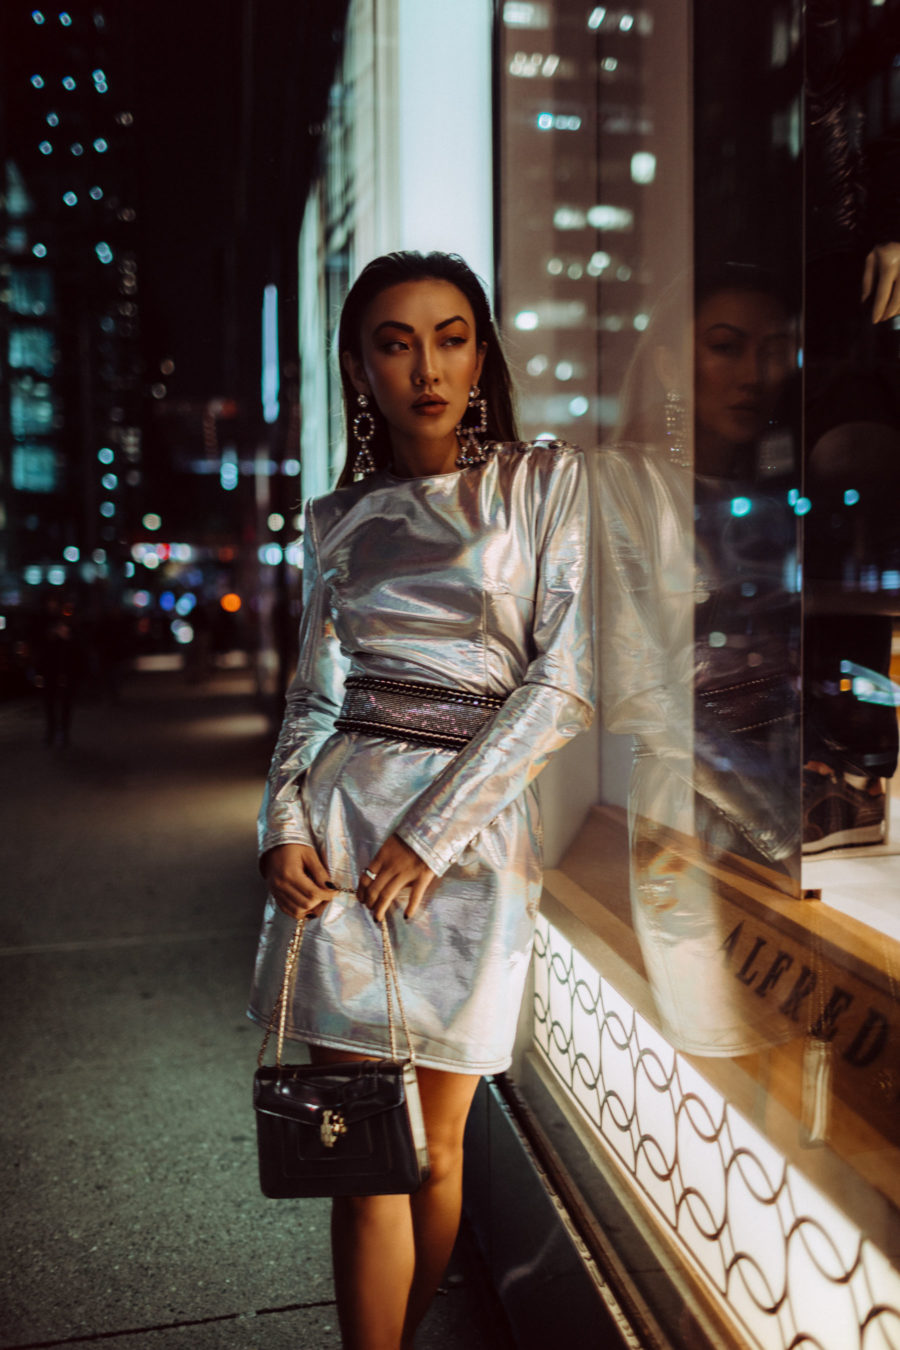 holiday trends for party season, holiday party outfit 2019, Metallic dress, metallic trend 2018, balmain silver dress // Notjessfashion.com